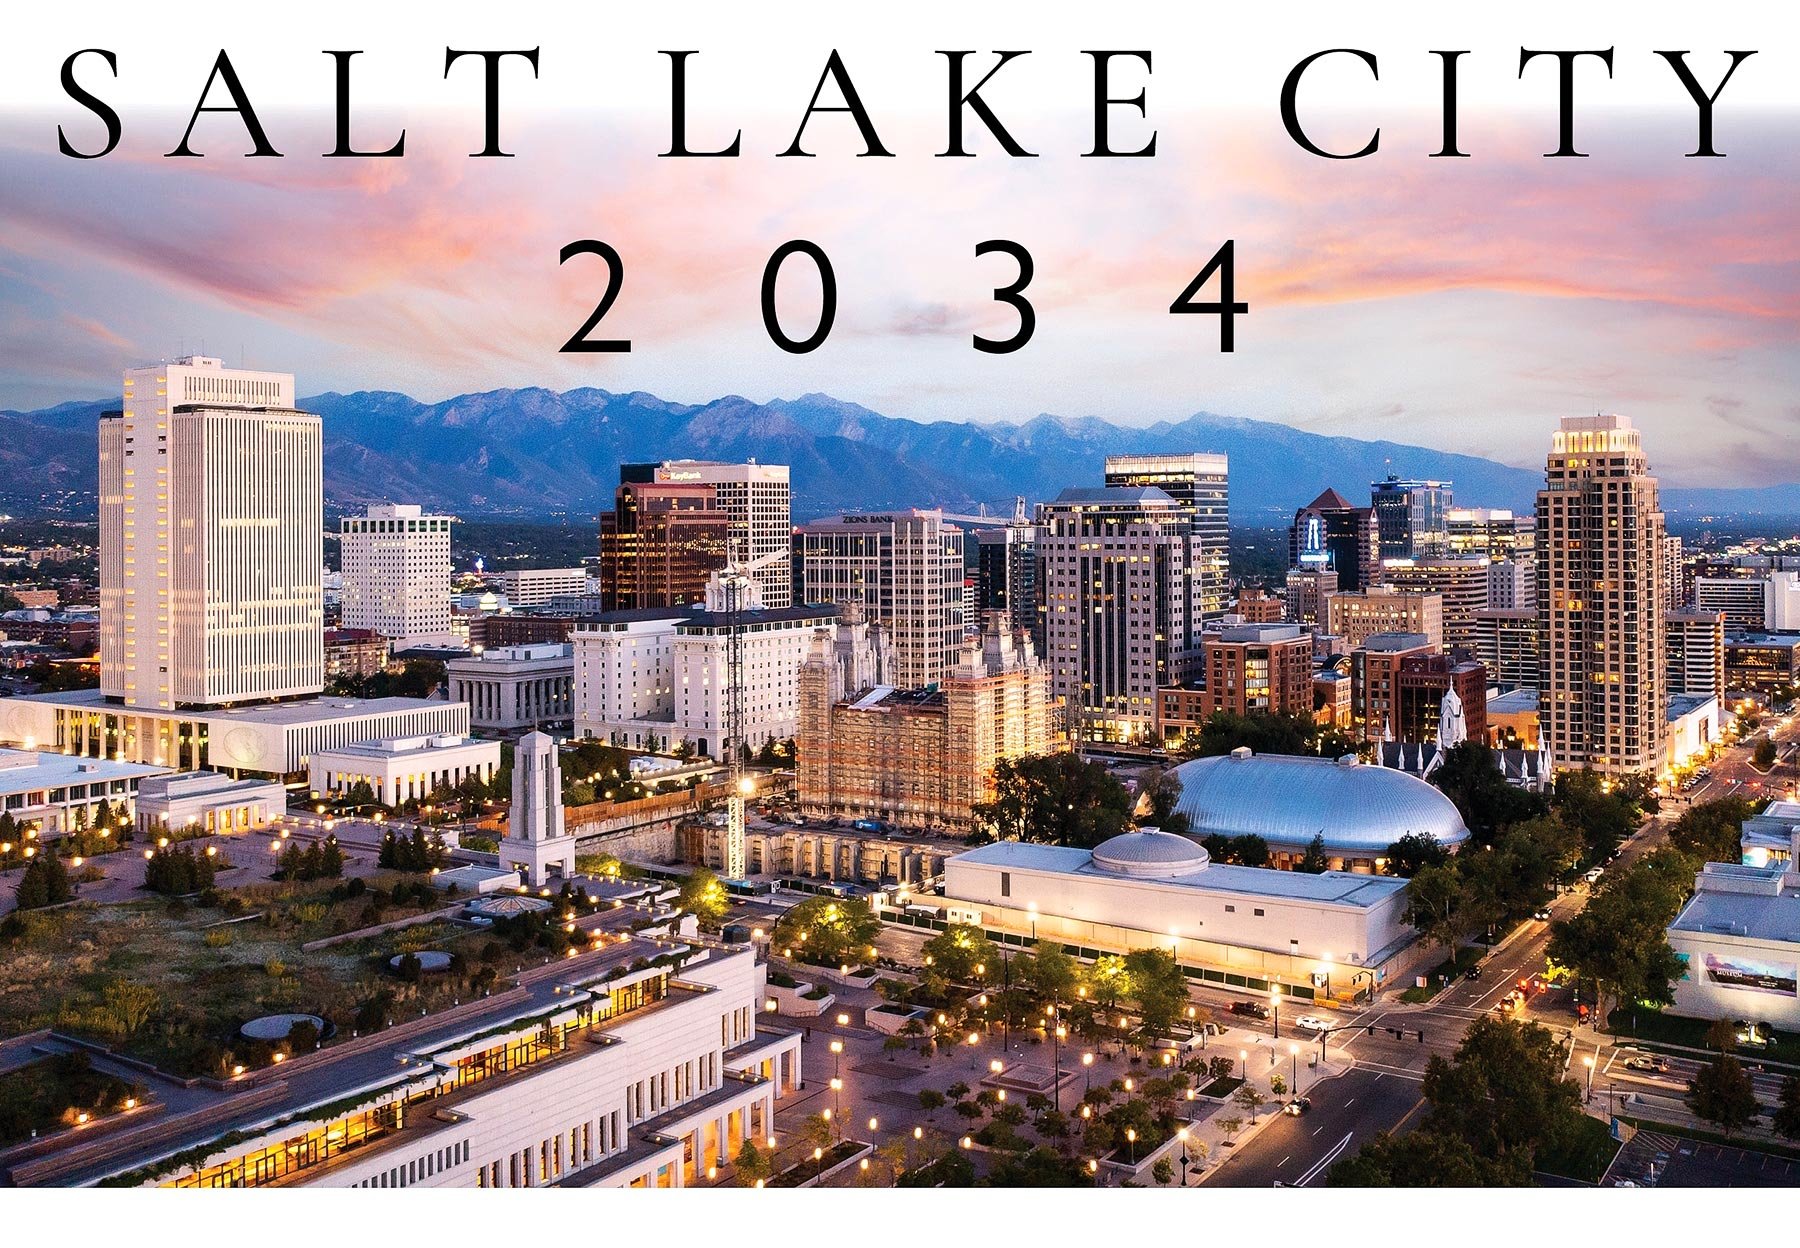 salt lake city to host olympic winter games in 2034